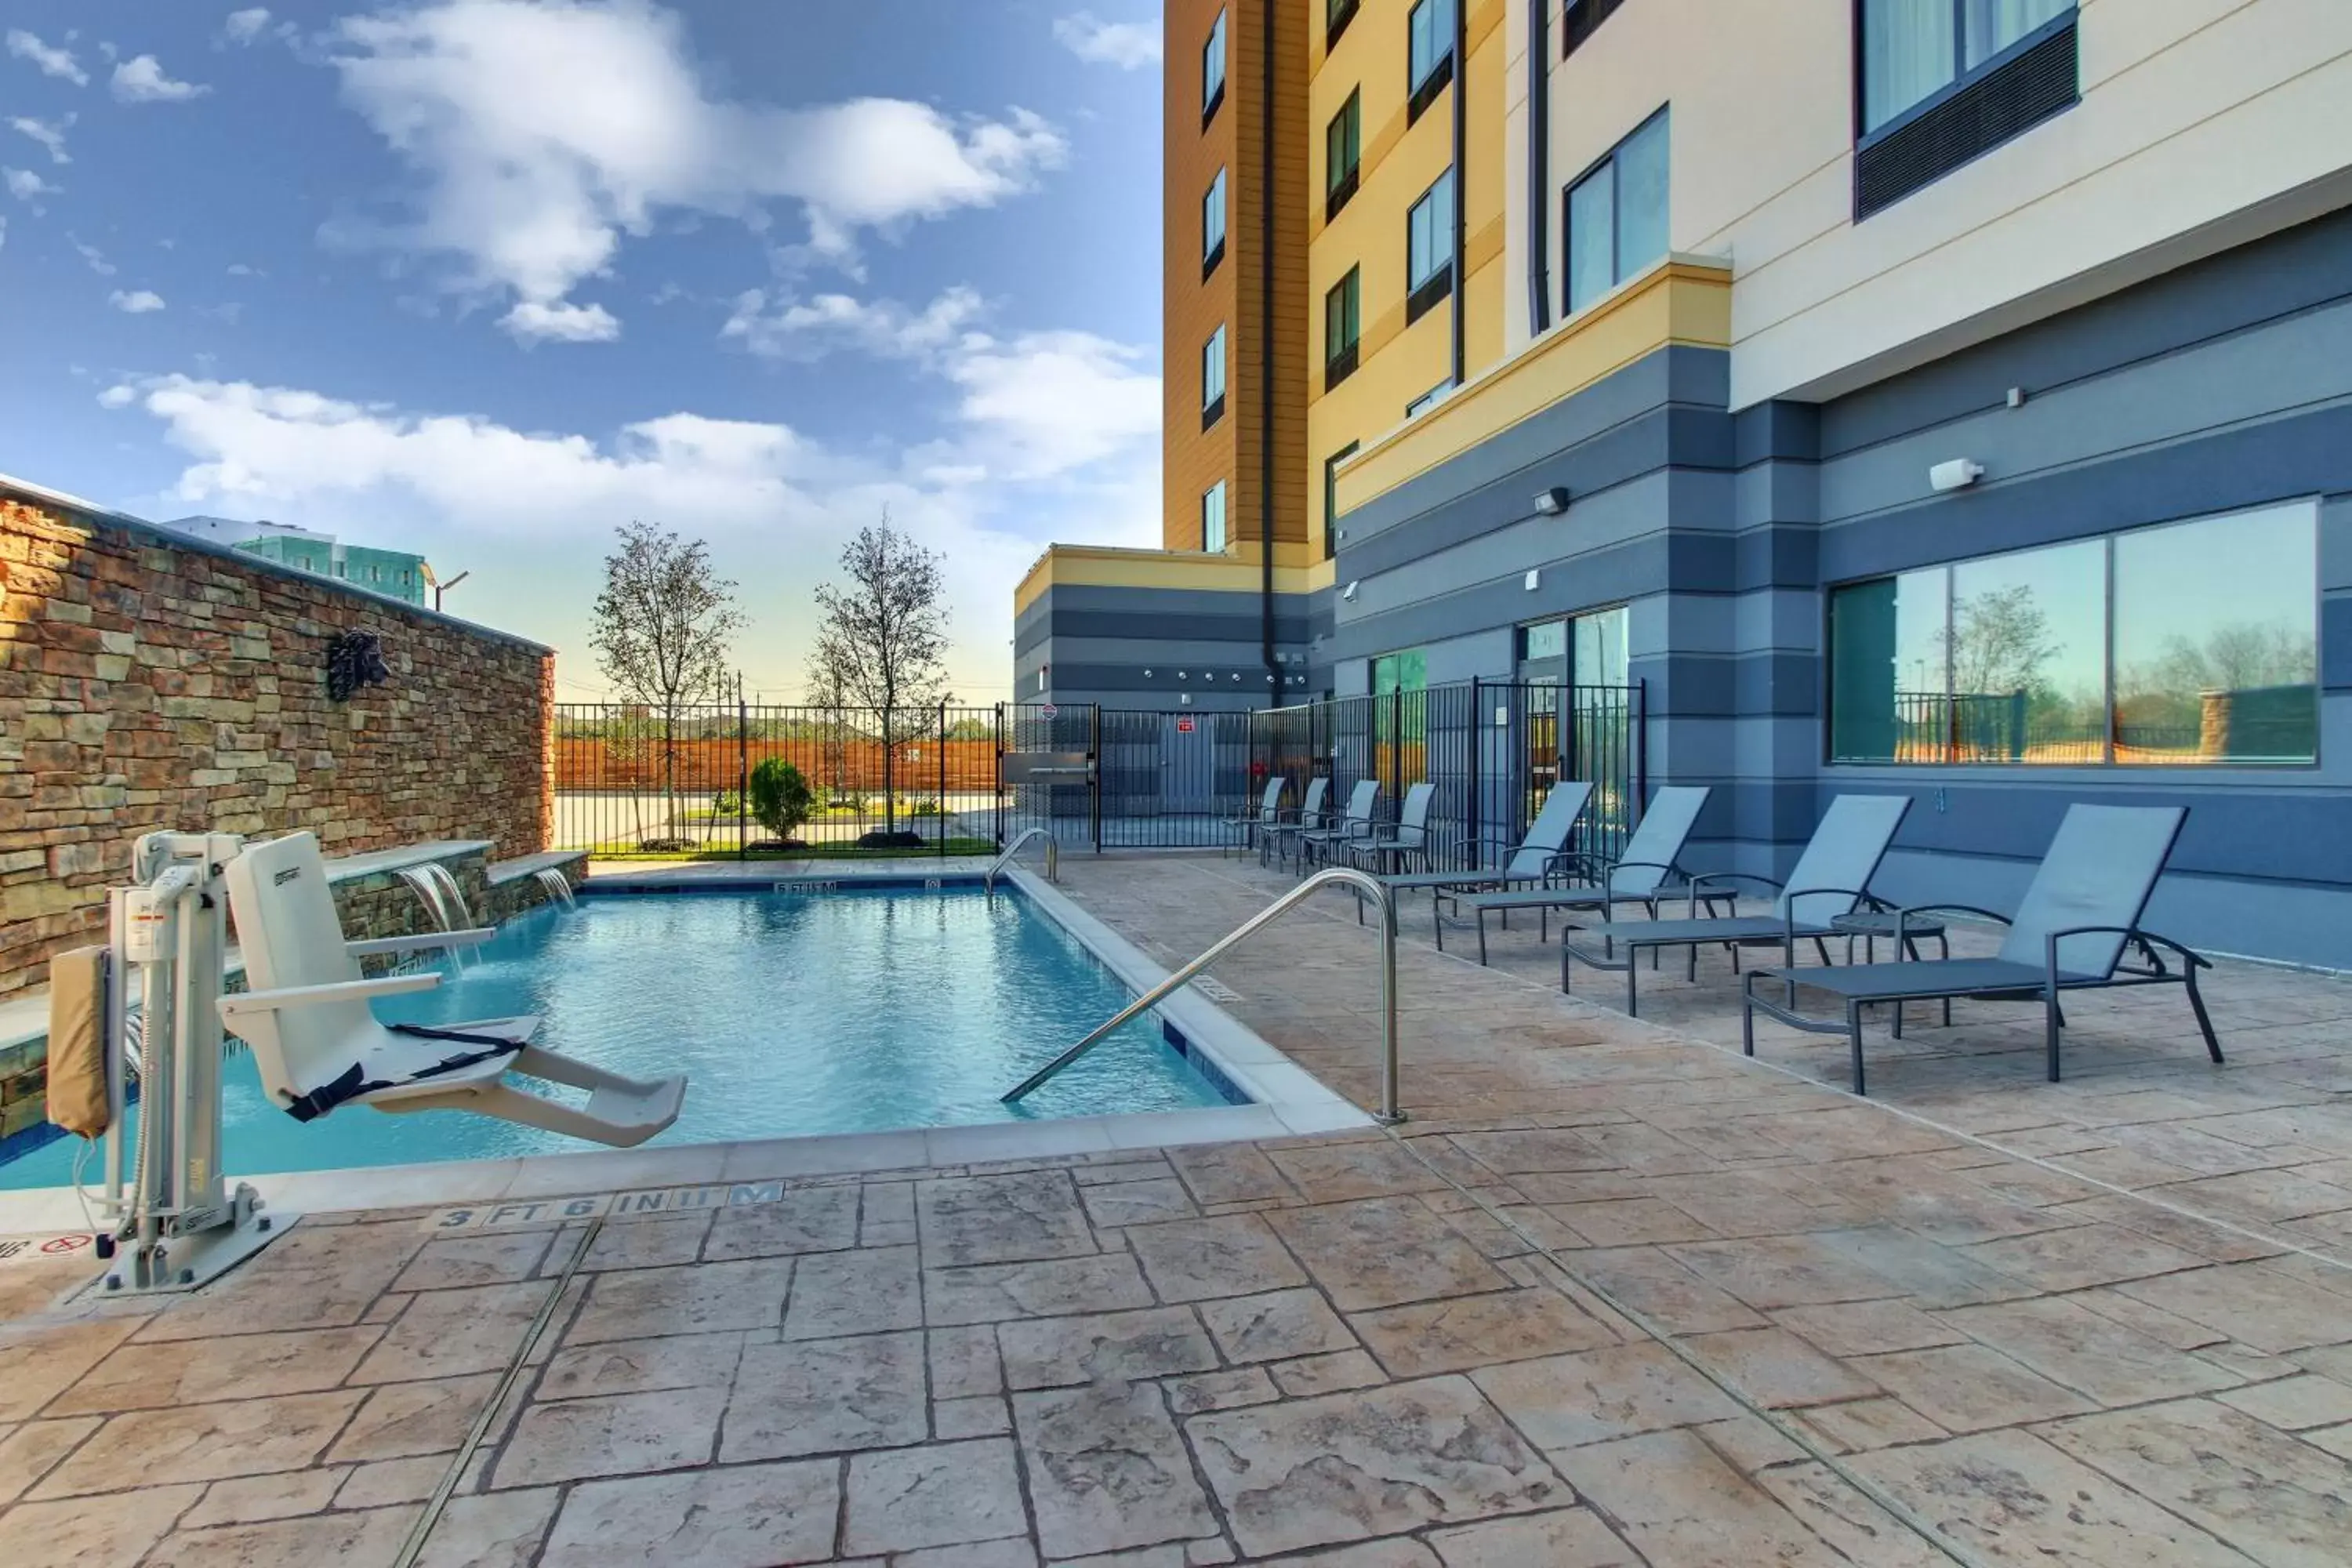 Swimming Pool in Fairfield Inn and Suites by Marriott Houston Brookhollow